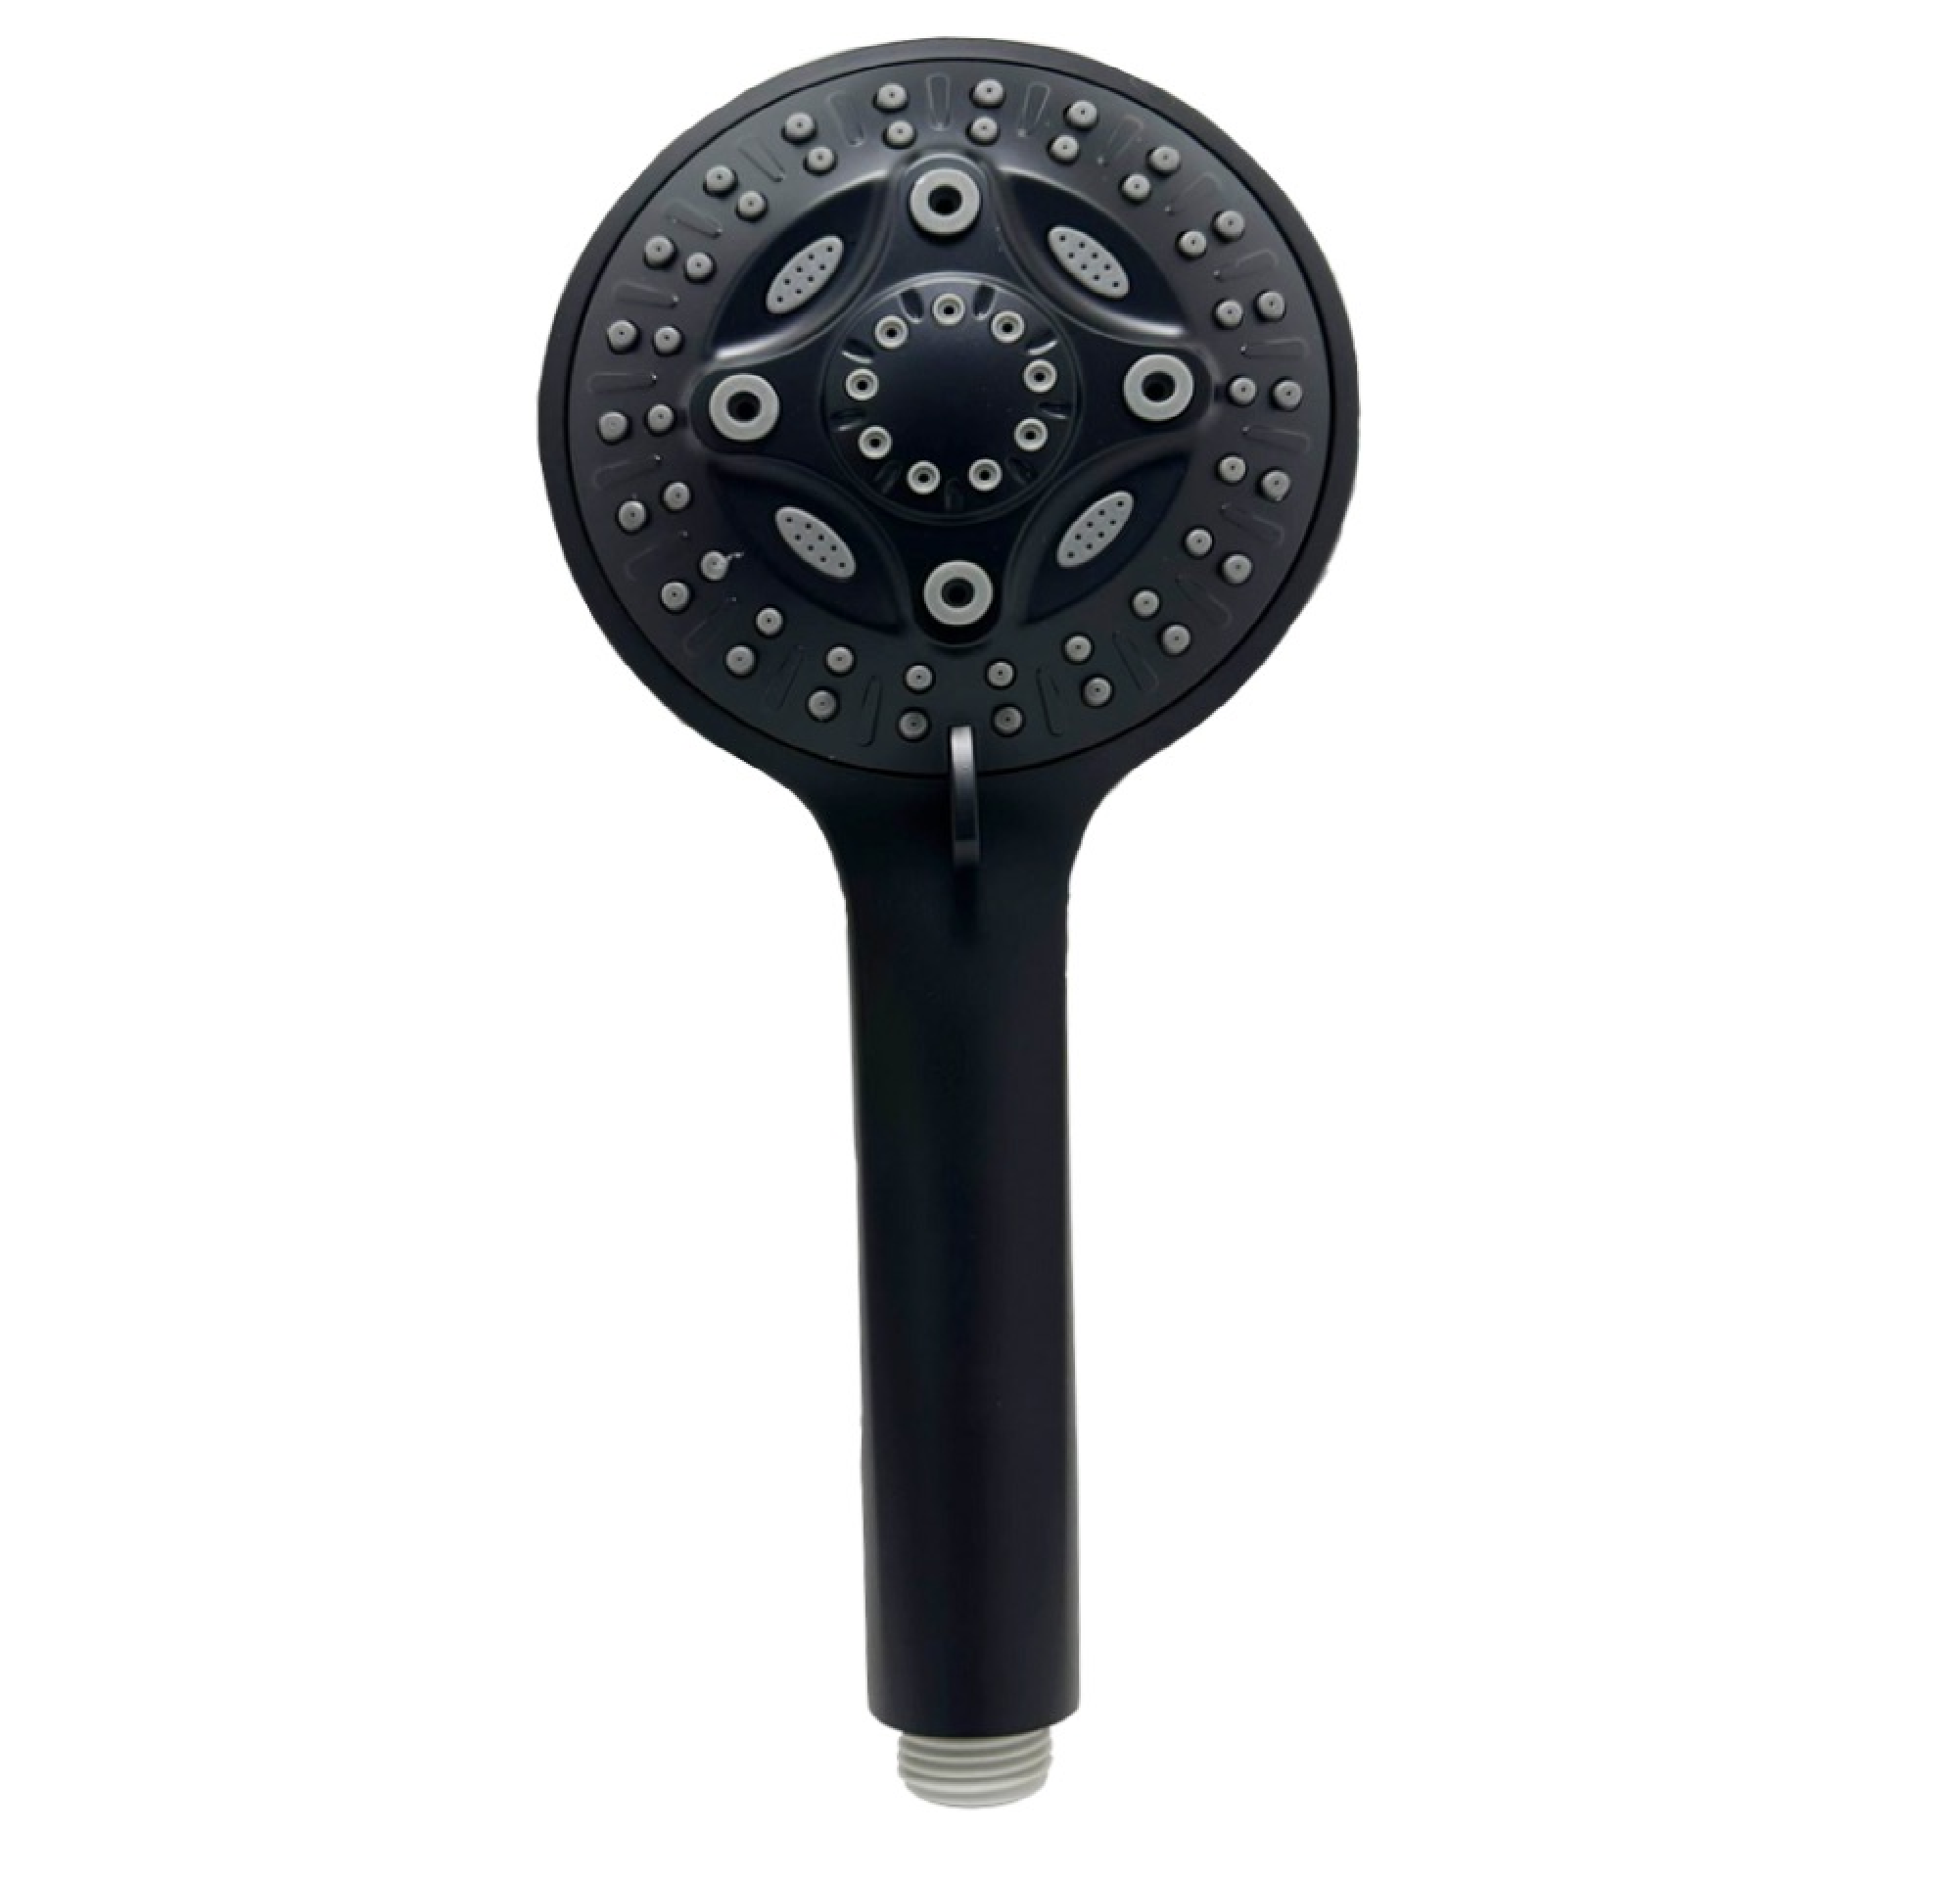 Innovare PRESSURE BOOSTER HYDROPOWER Shower Head 8 Functions BLACK